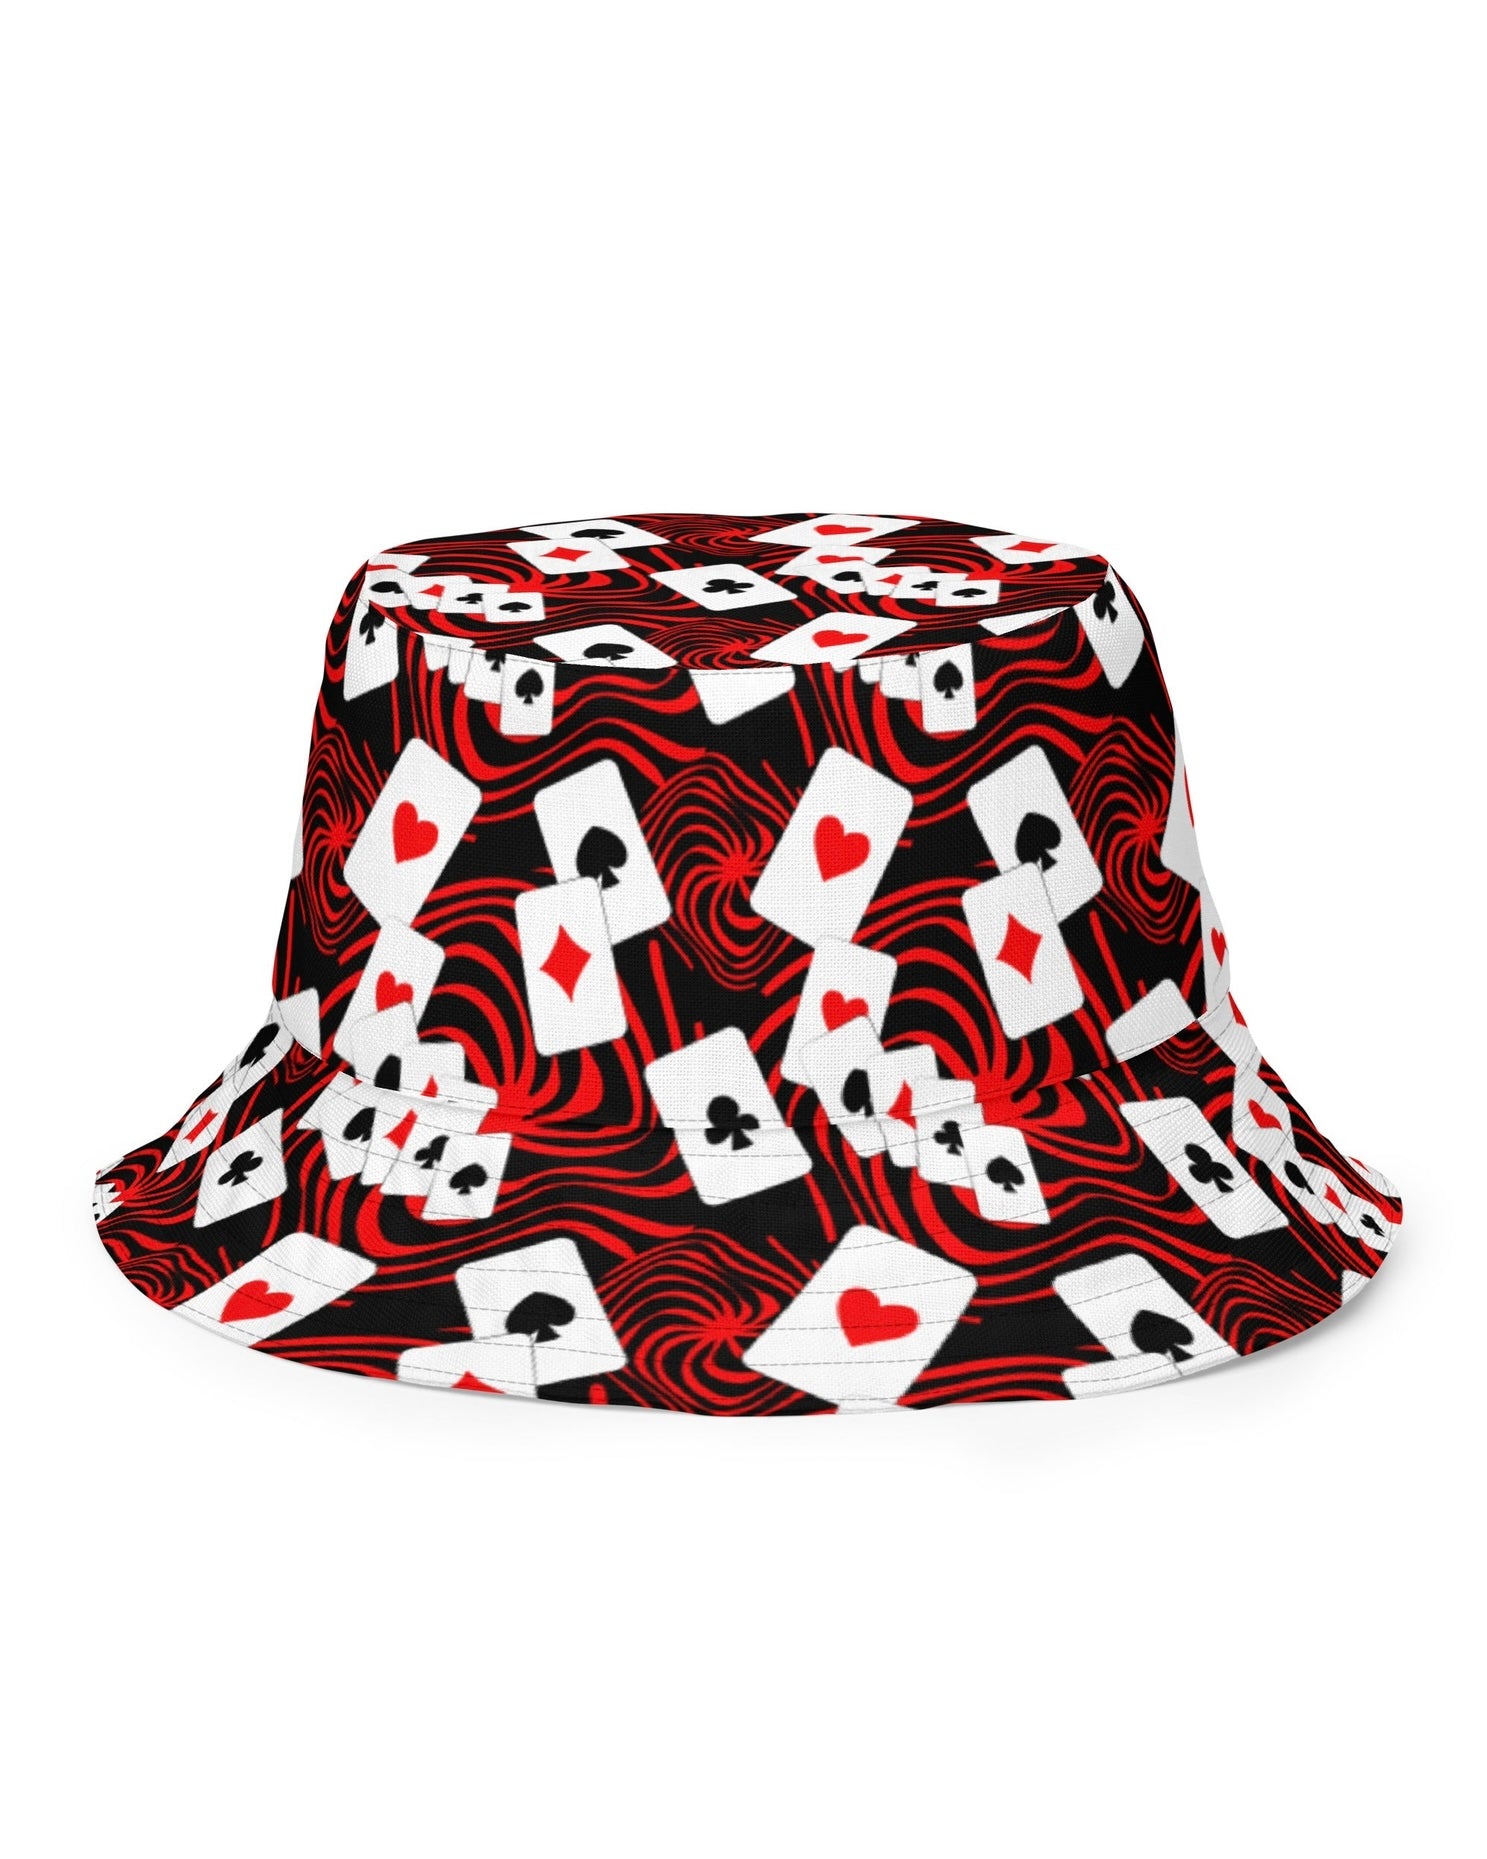 Curiouser and Curiouser / Off With Your Head Reversible Bucket Hat, Bucket Hat, - One Stop Rave